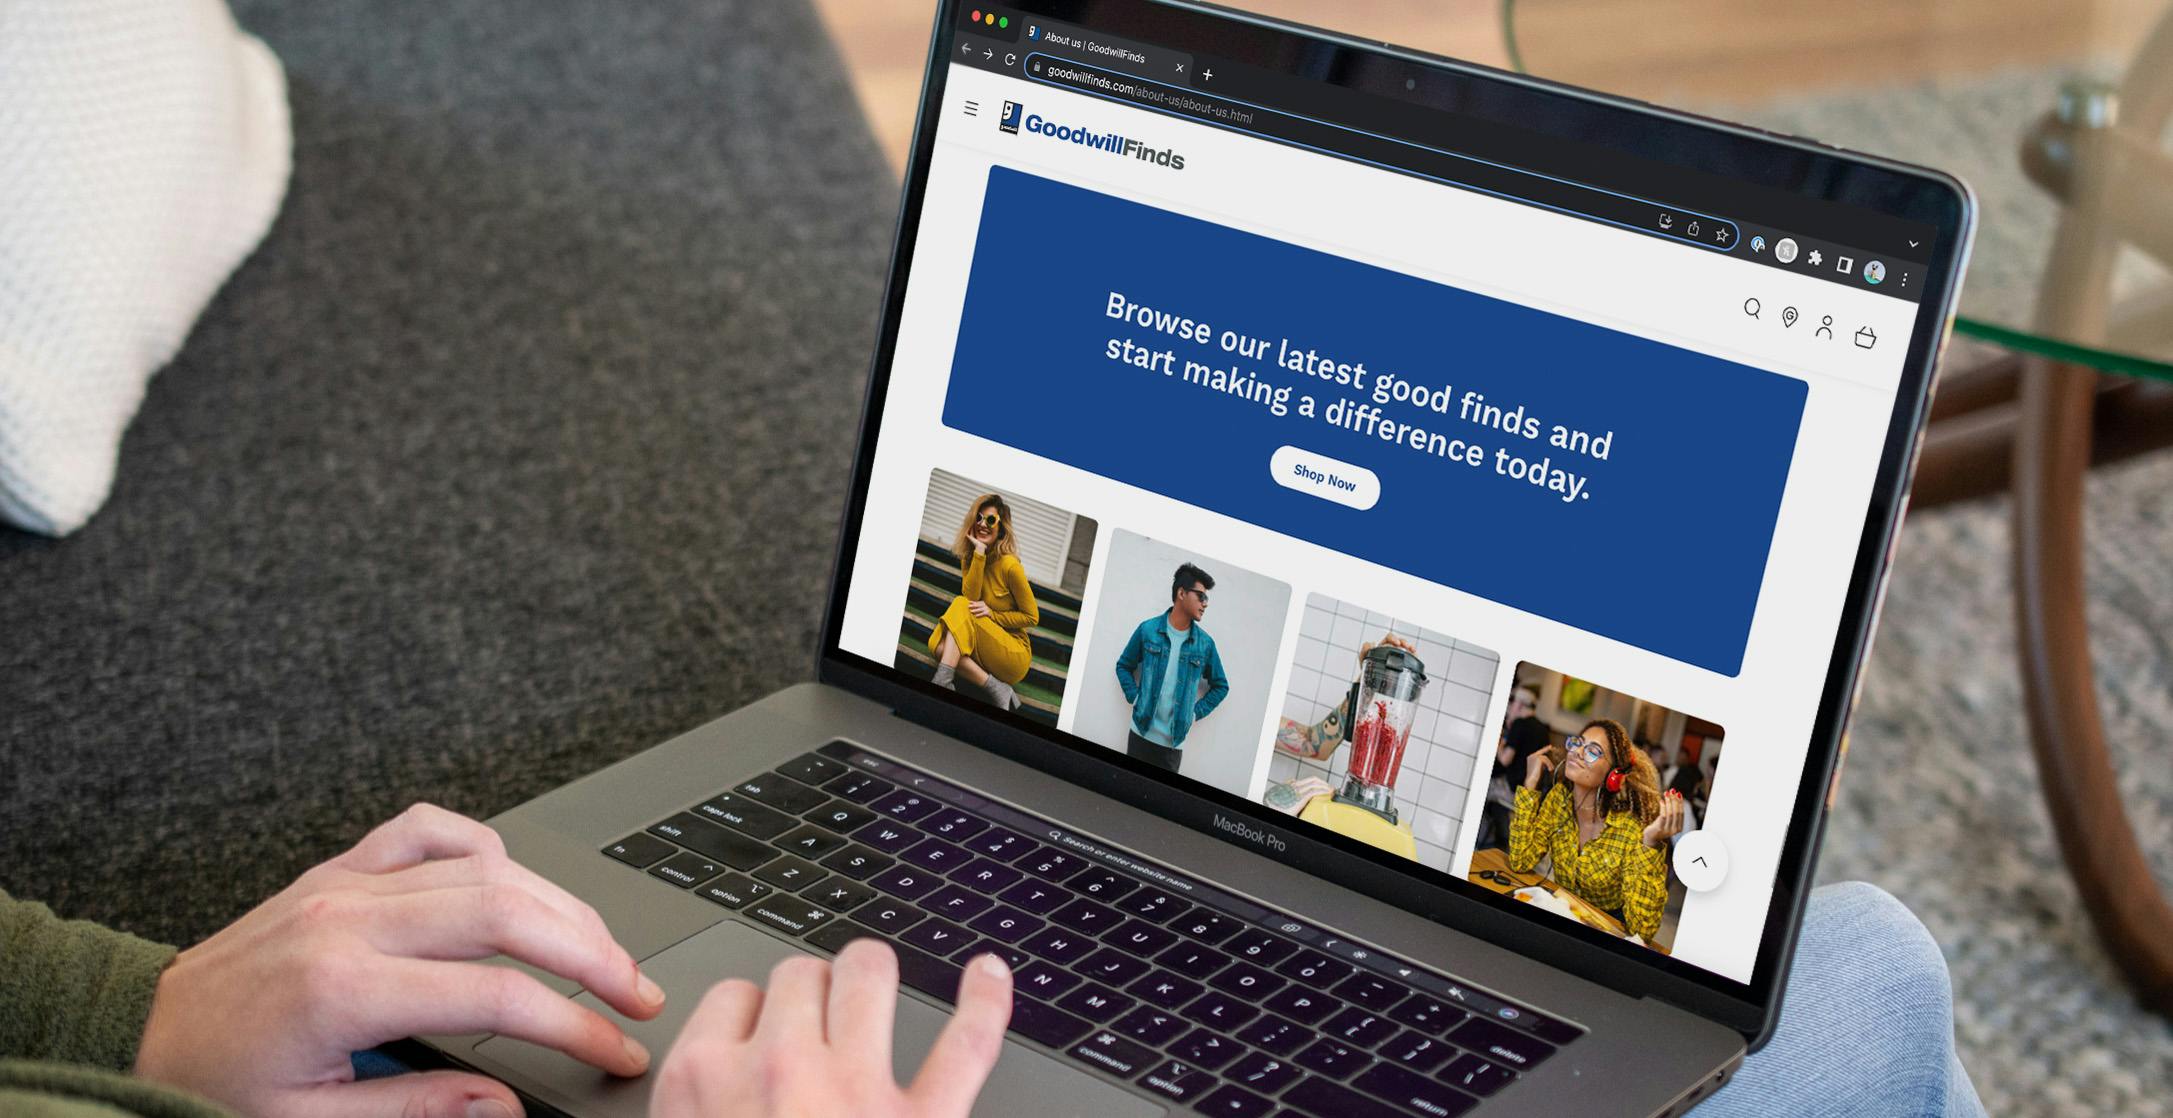 Goodwill Recently Launched an Online Marketplace, But It Might Not Save You Much